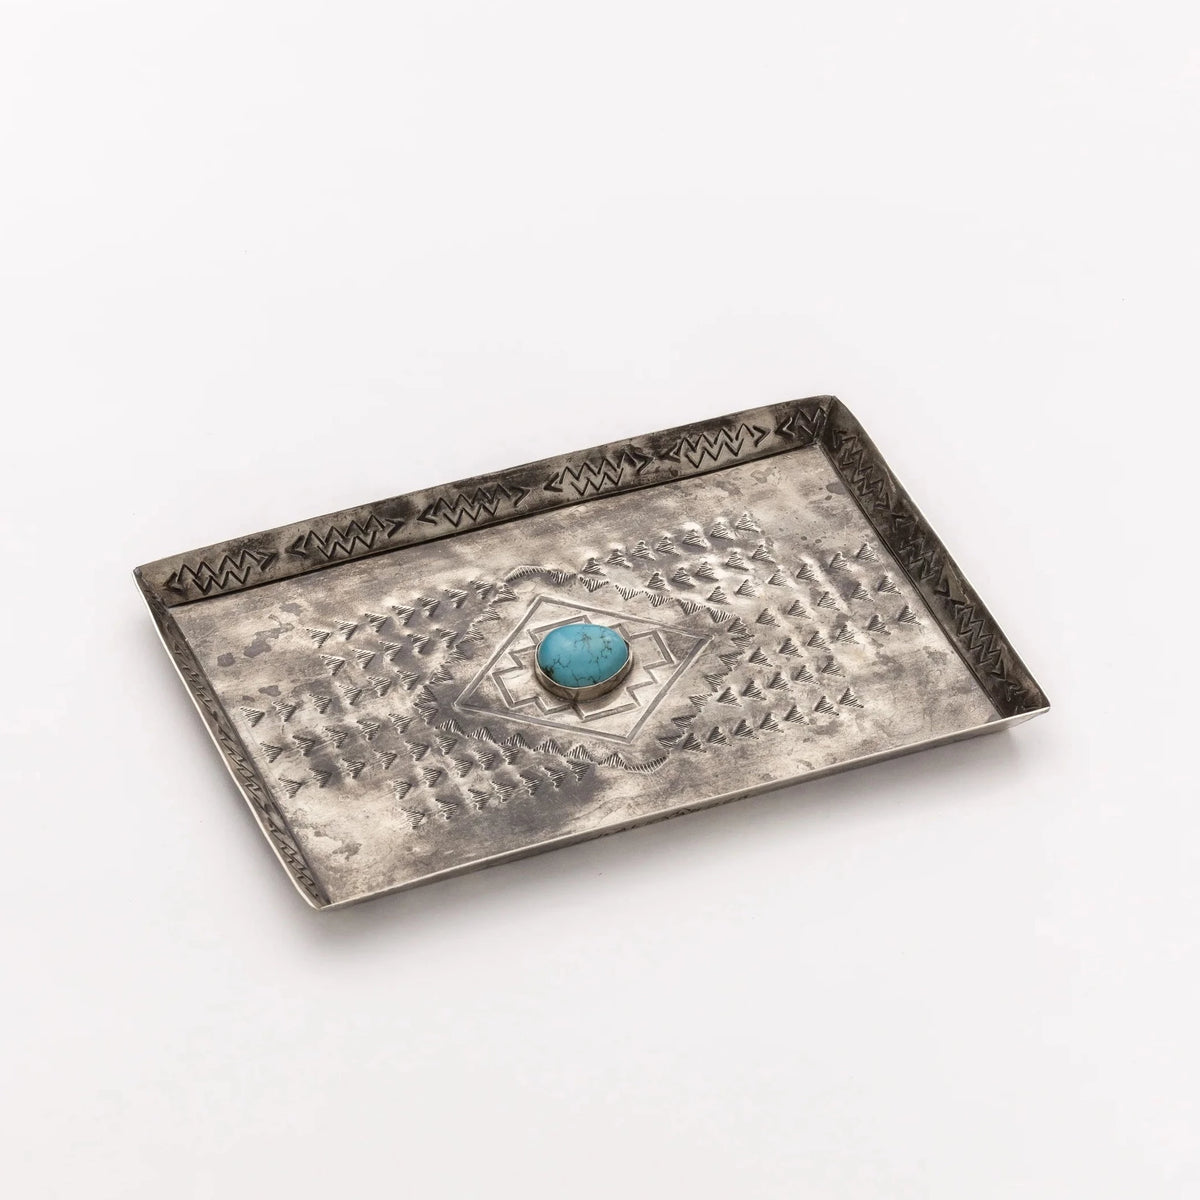 Medium Stamped Silver Tray With Turquoise By J. Alexander Rustic Silver